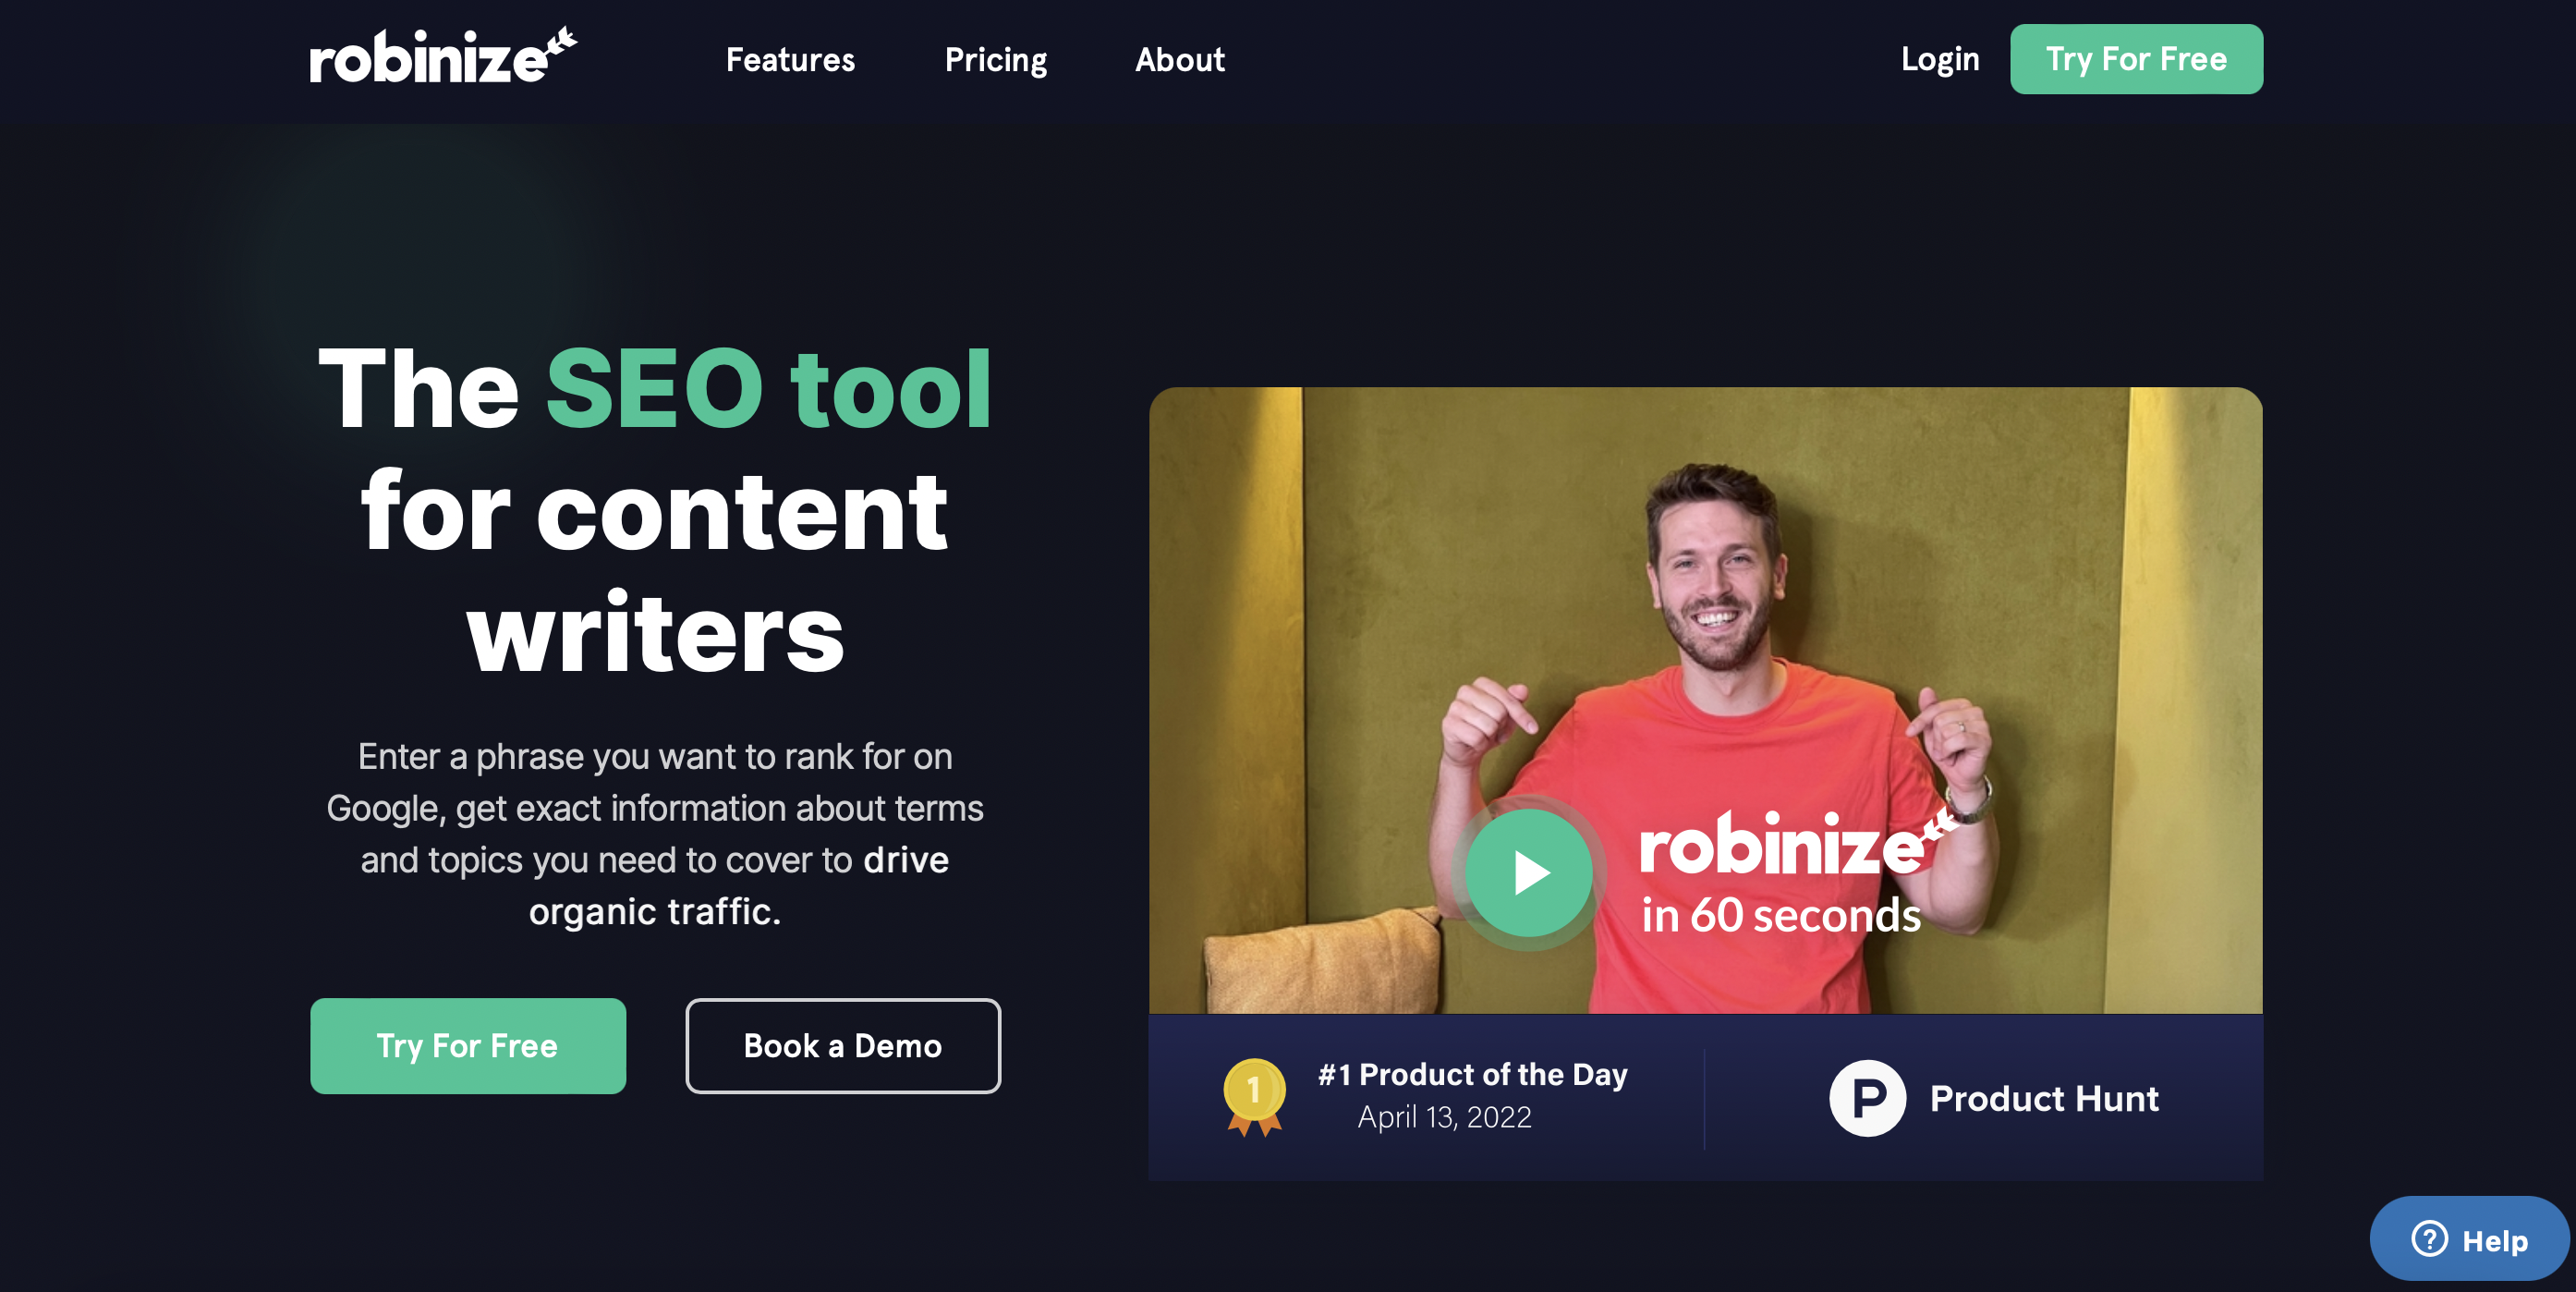 Robinize is the tool you need to research, write and optimize your content for SEO.